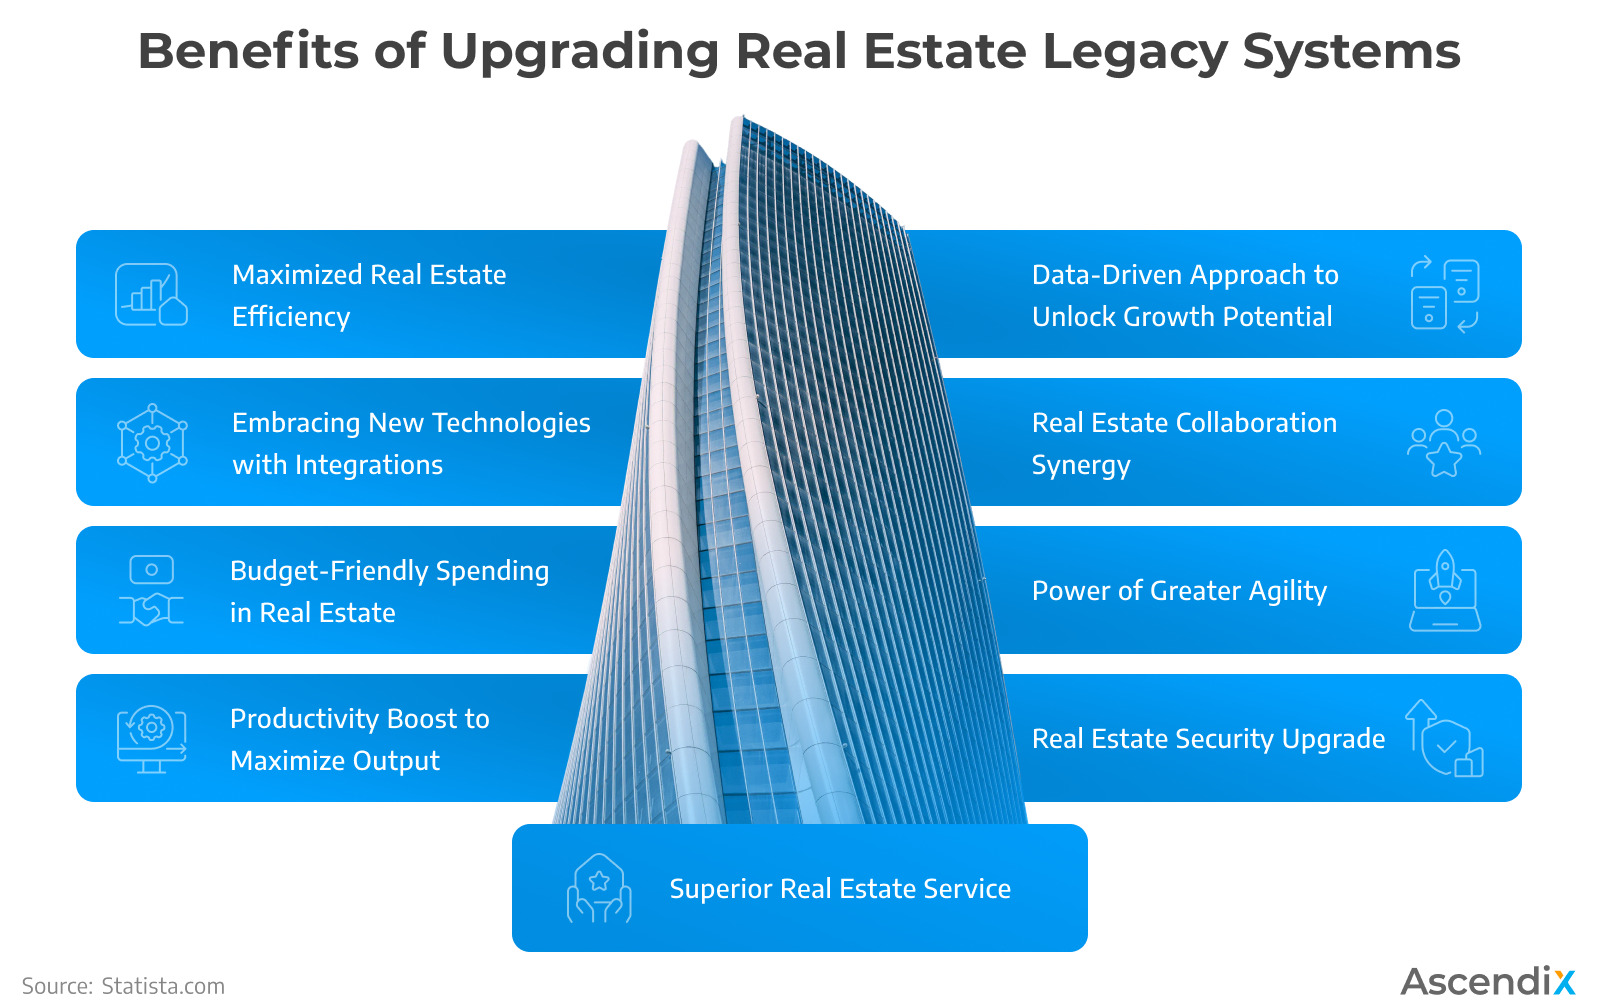 Benefits of Upgrading Real Estate Legacy Systems